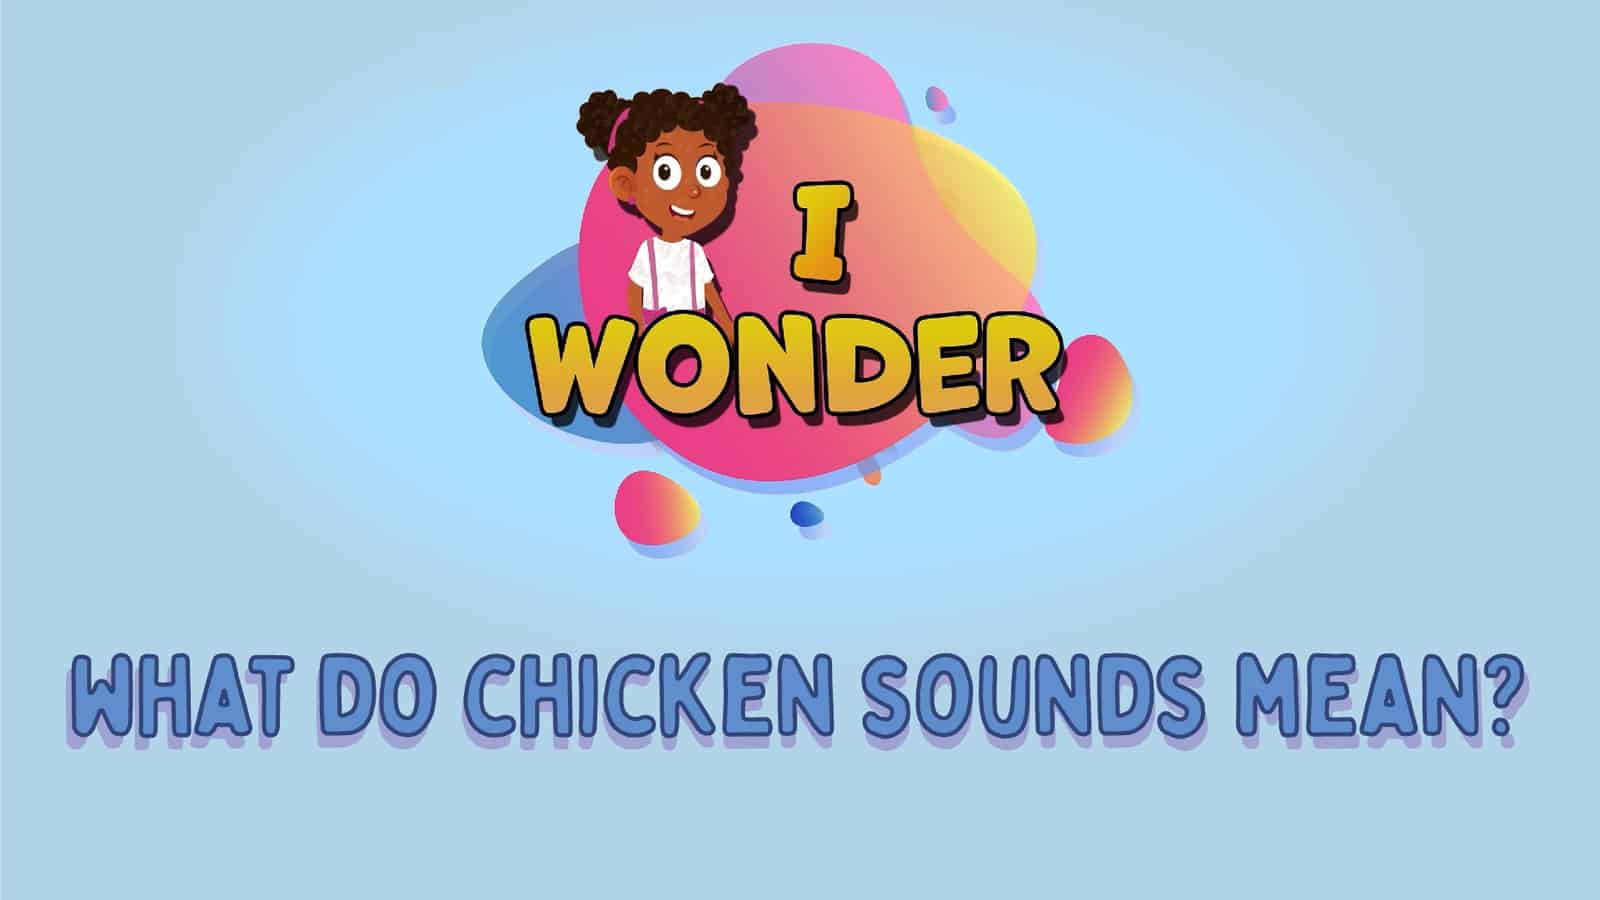 What Do Chicken Sounds Mean?